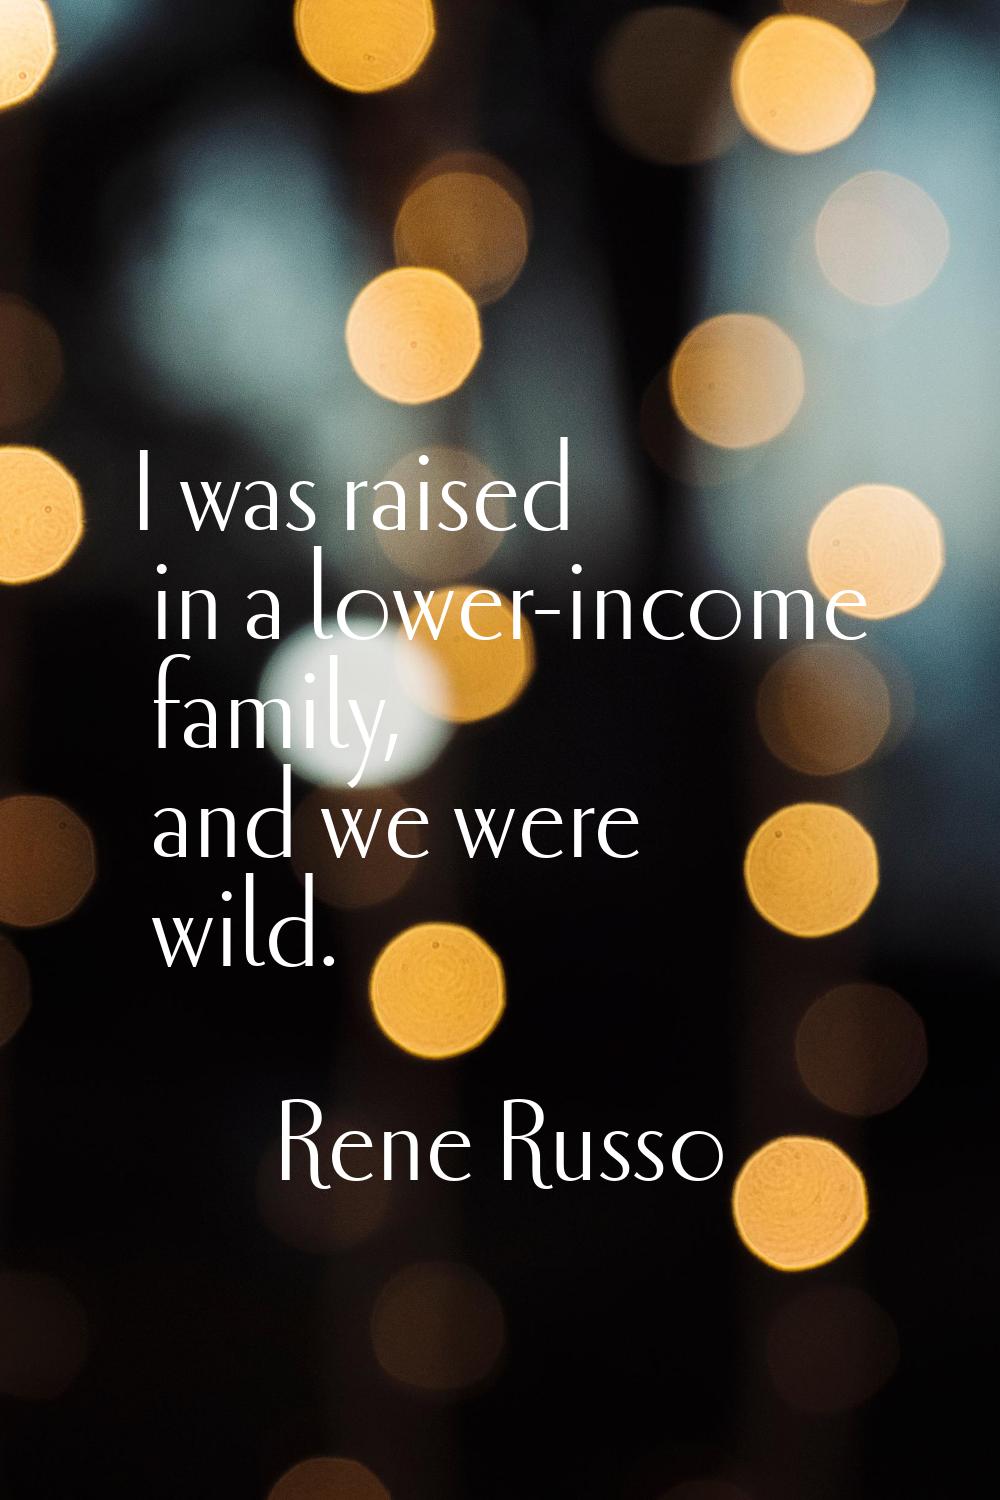 I was raised in a lower-income family, and we were wild.